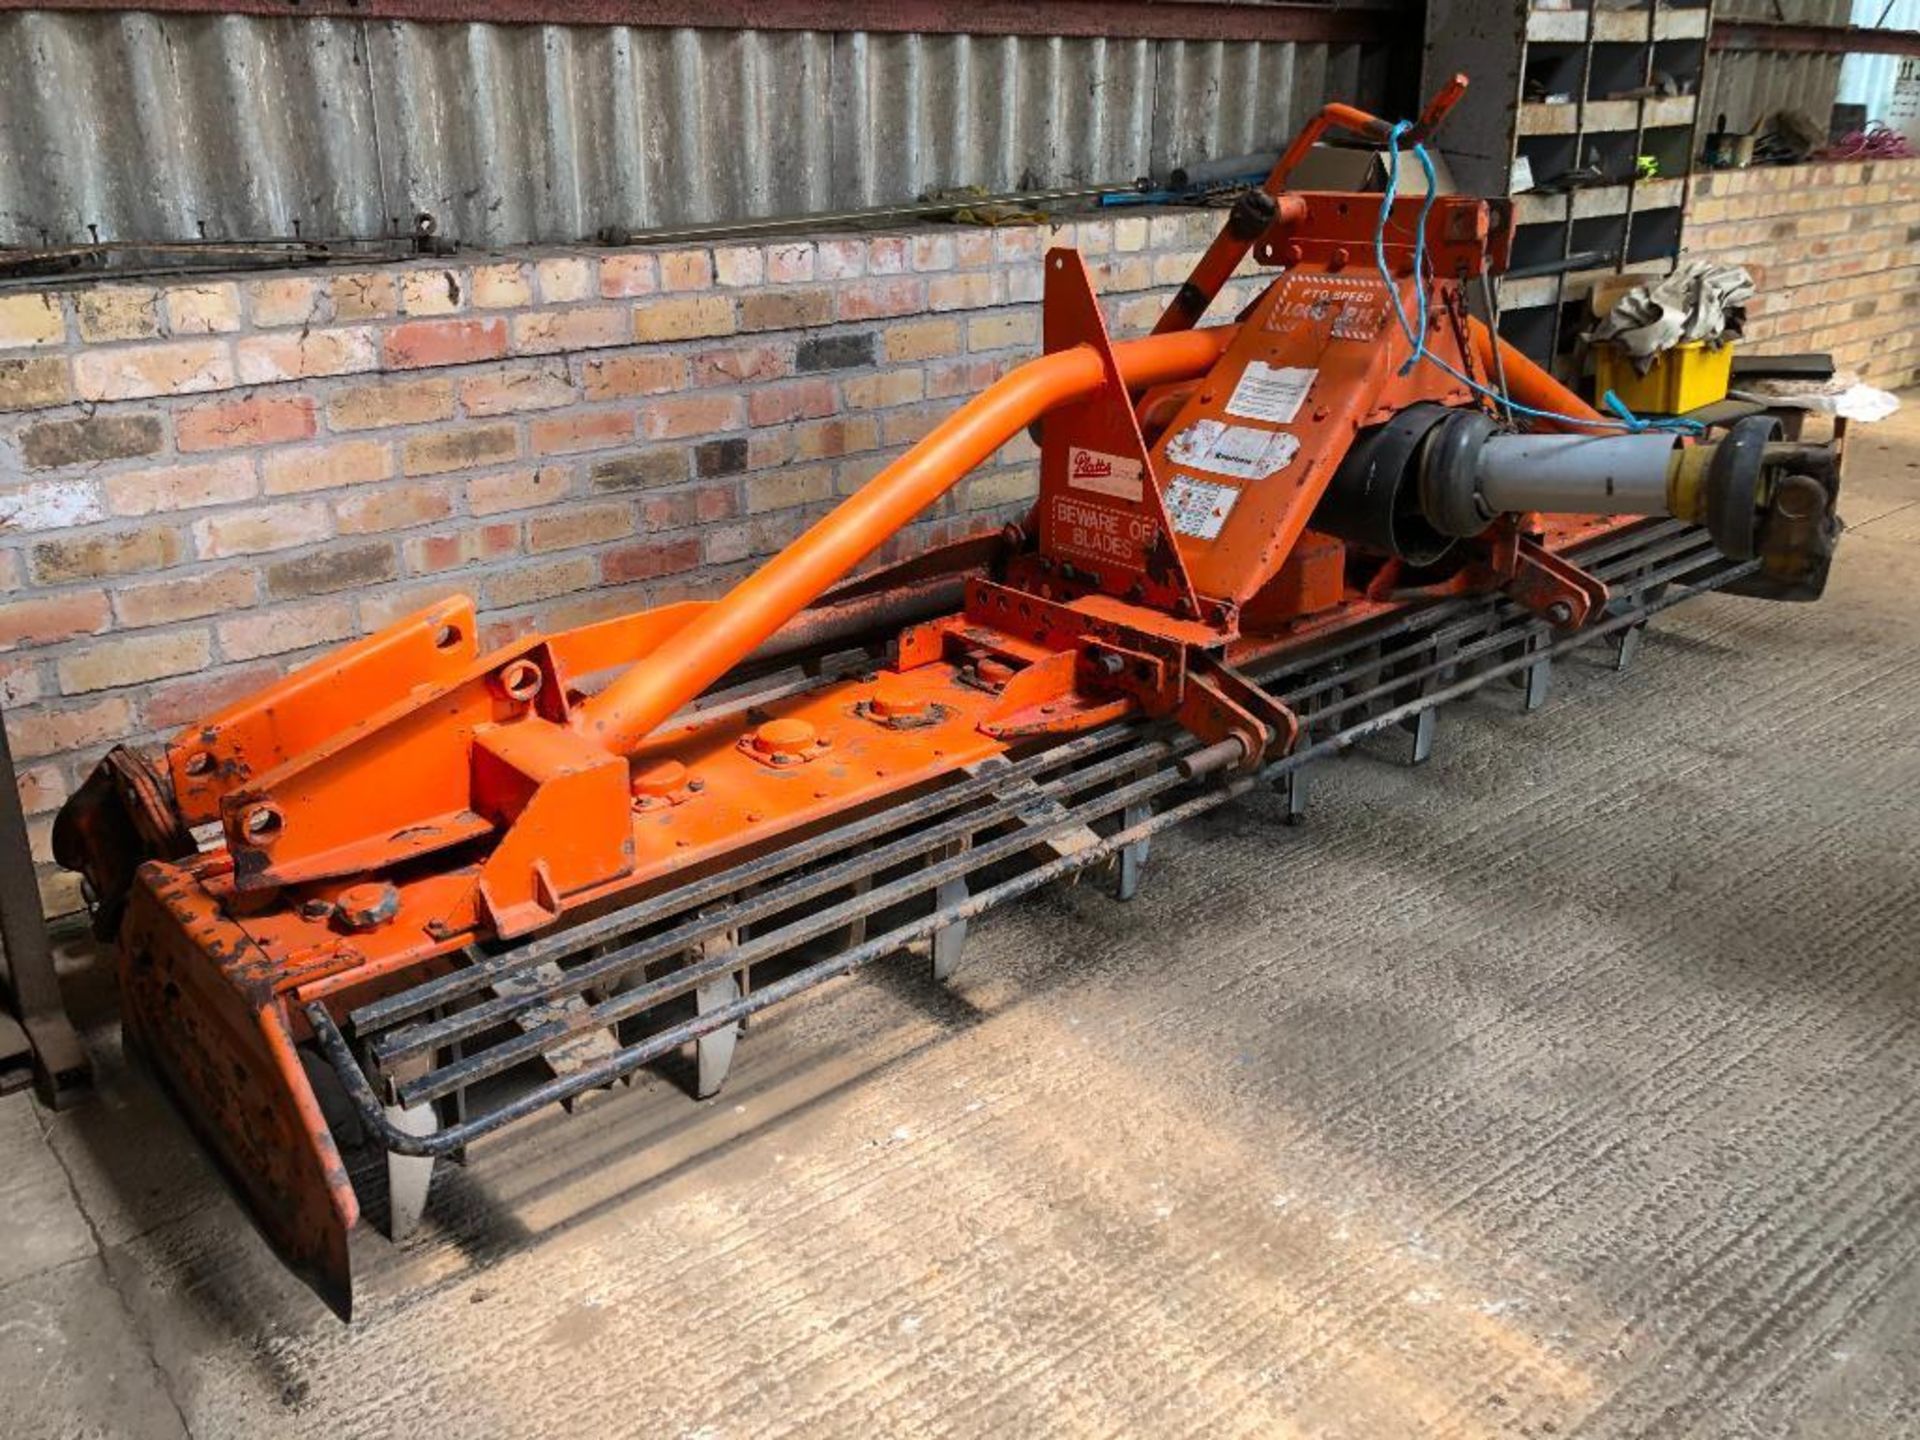 Maschio HM3500 3.5m power harrow with rear crumbler, PTO driven. Serial No: 2007021 NB: Manual in th - Image 3 of 12